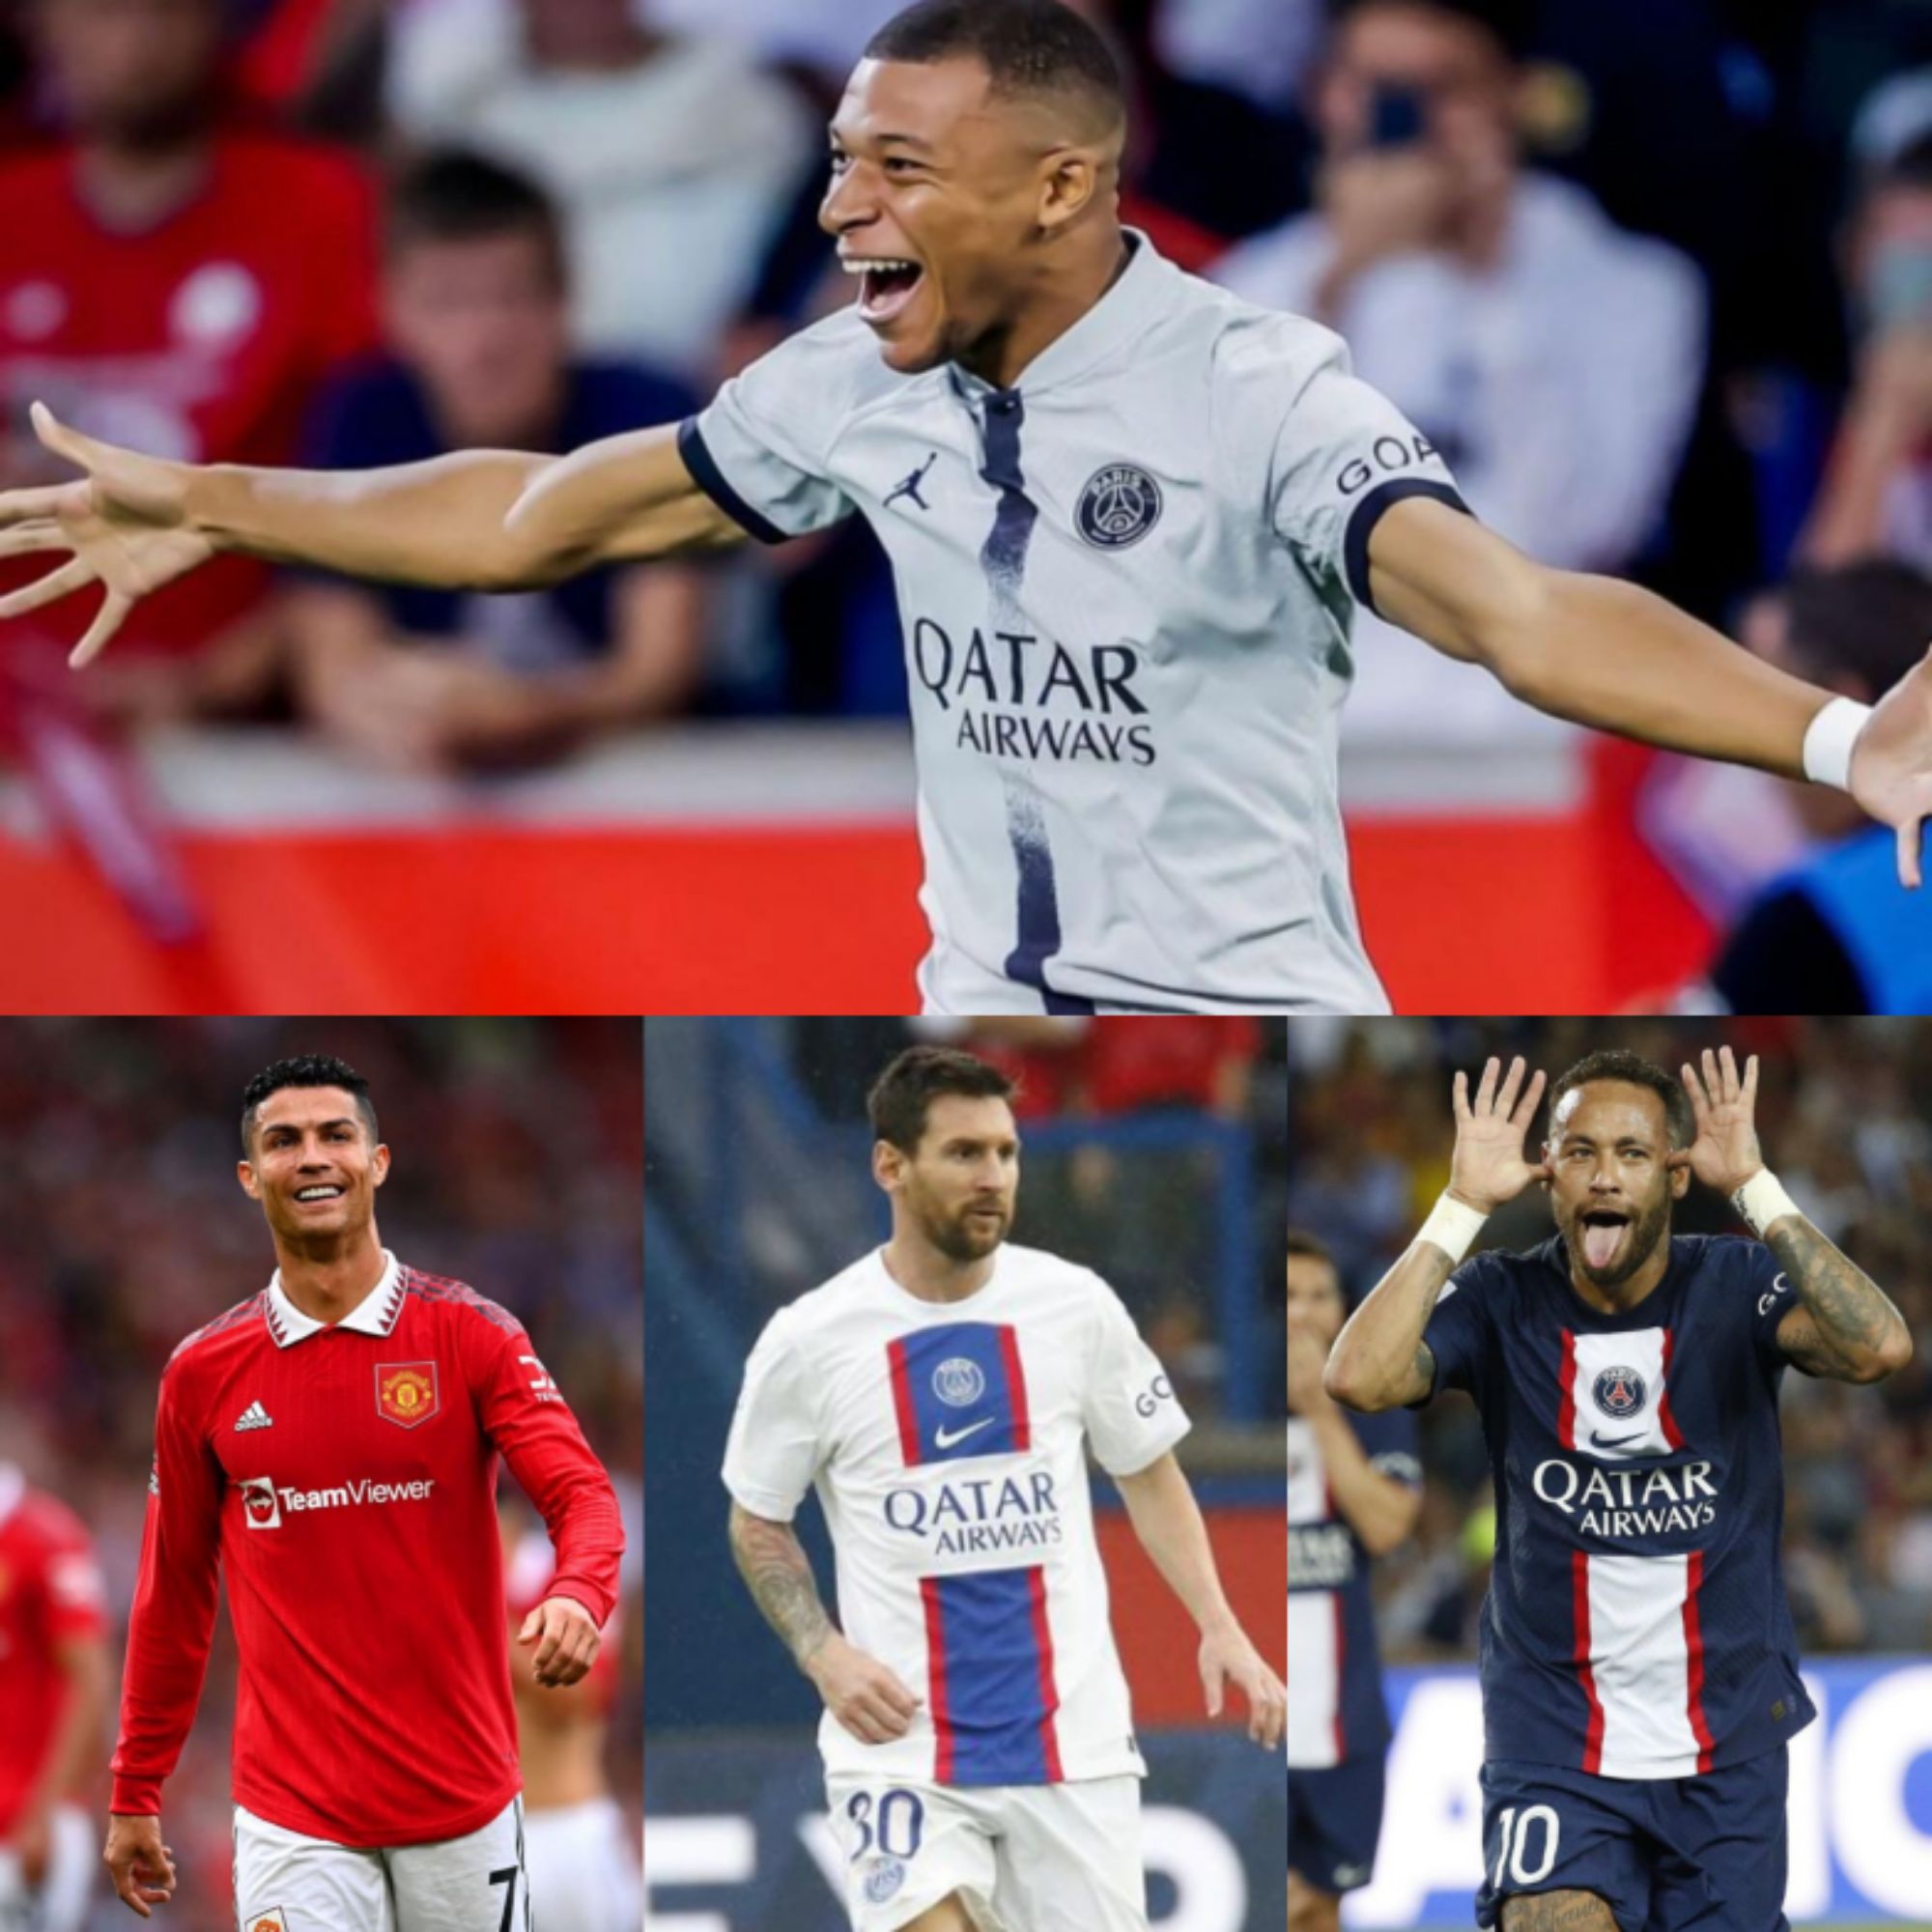 Top 10 World’s Richest Footballers: Mbappe Overtakes Ronaldo, Messi